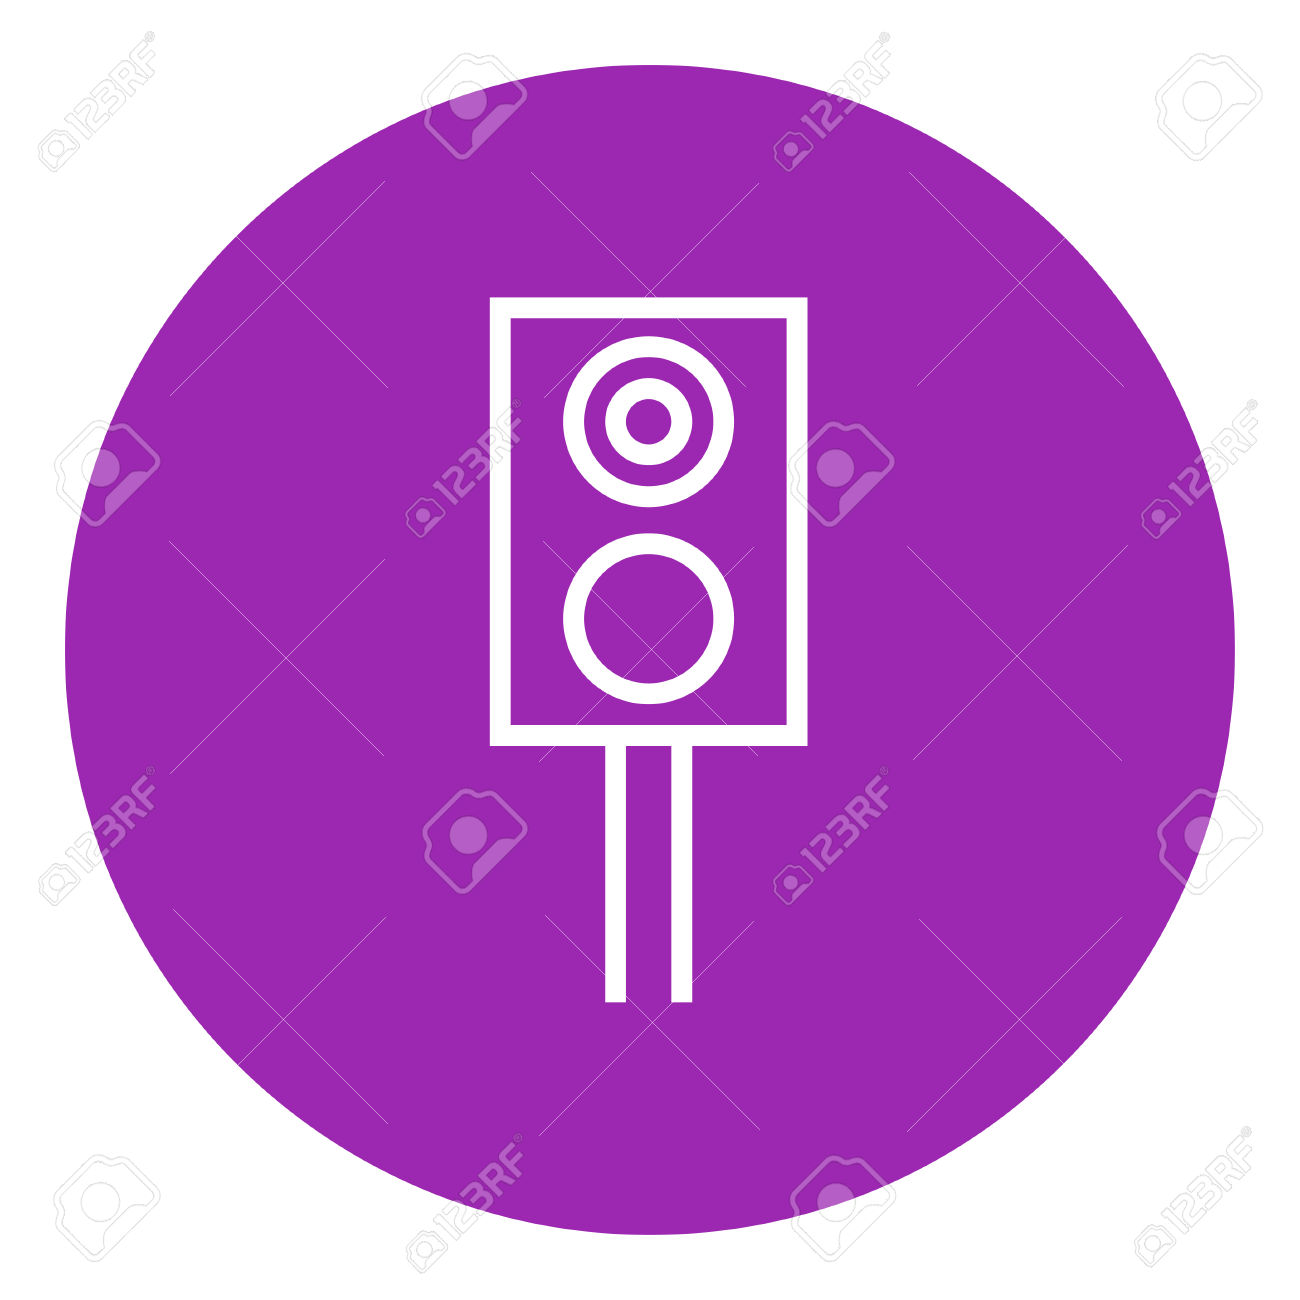 Railway Traffic Light Thick Line Icon With Pointed Corners And.